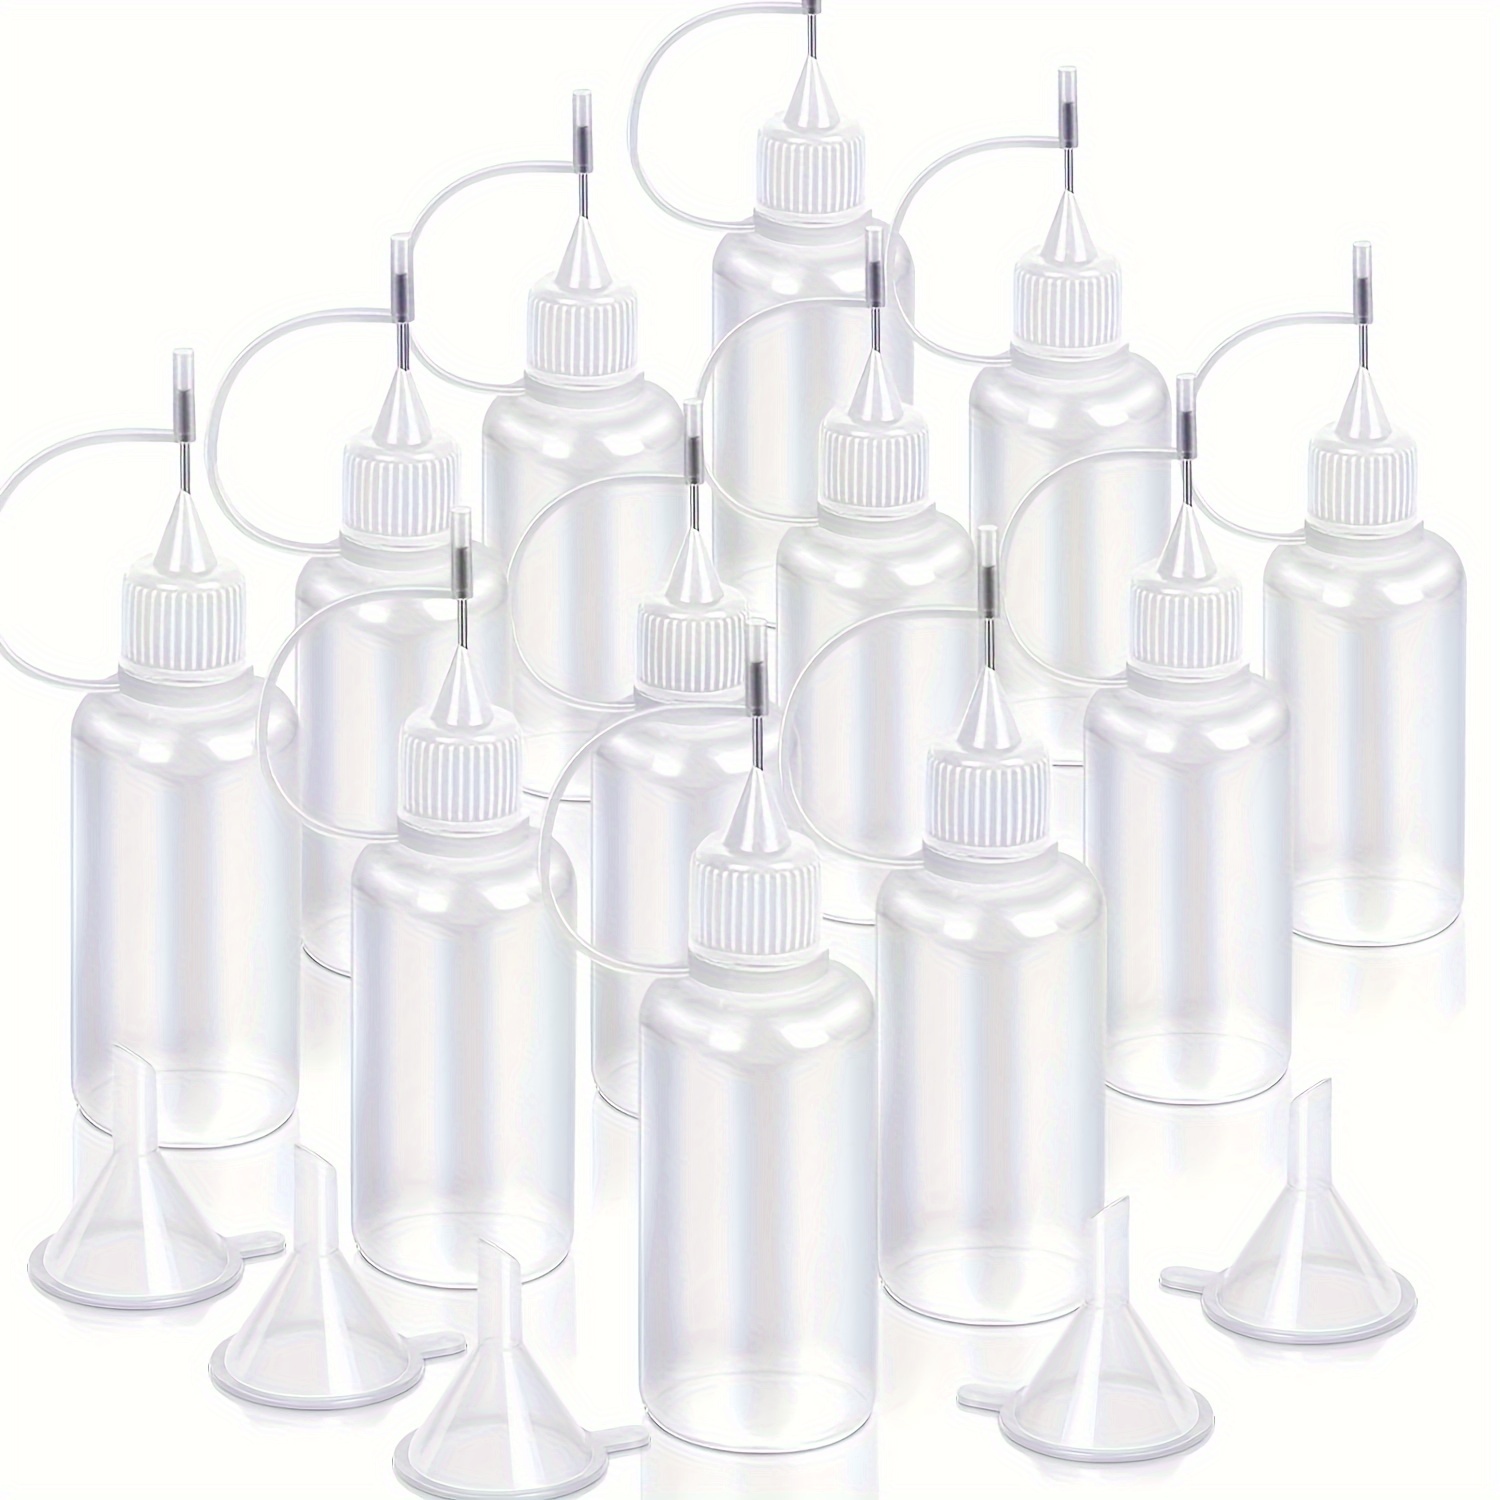 10ml Needle Tip Bottle Applicator Bottle for Paint Pointed Mouth